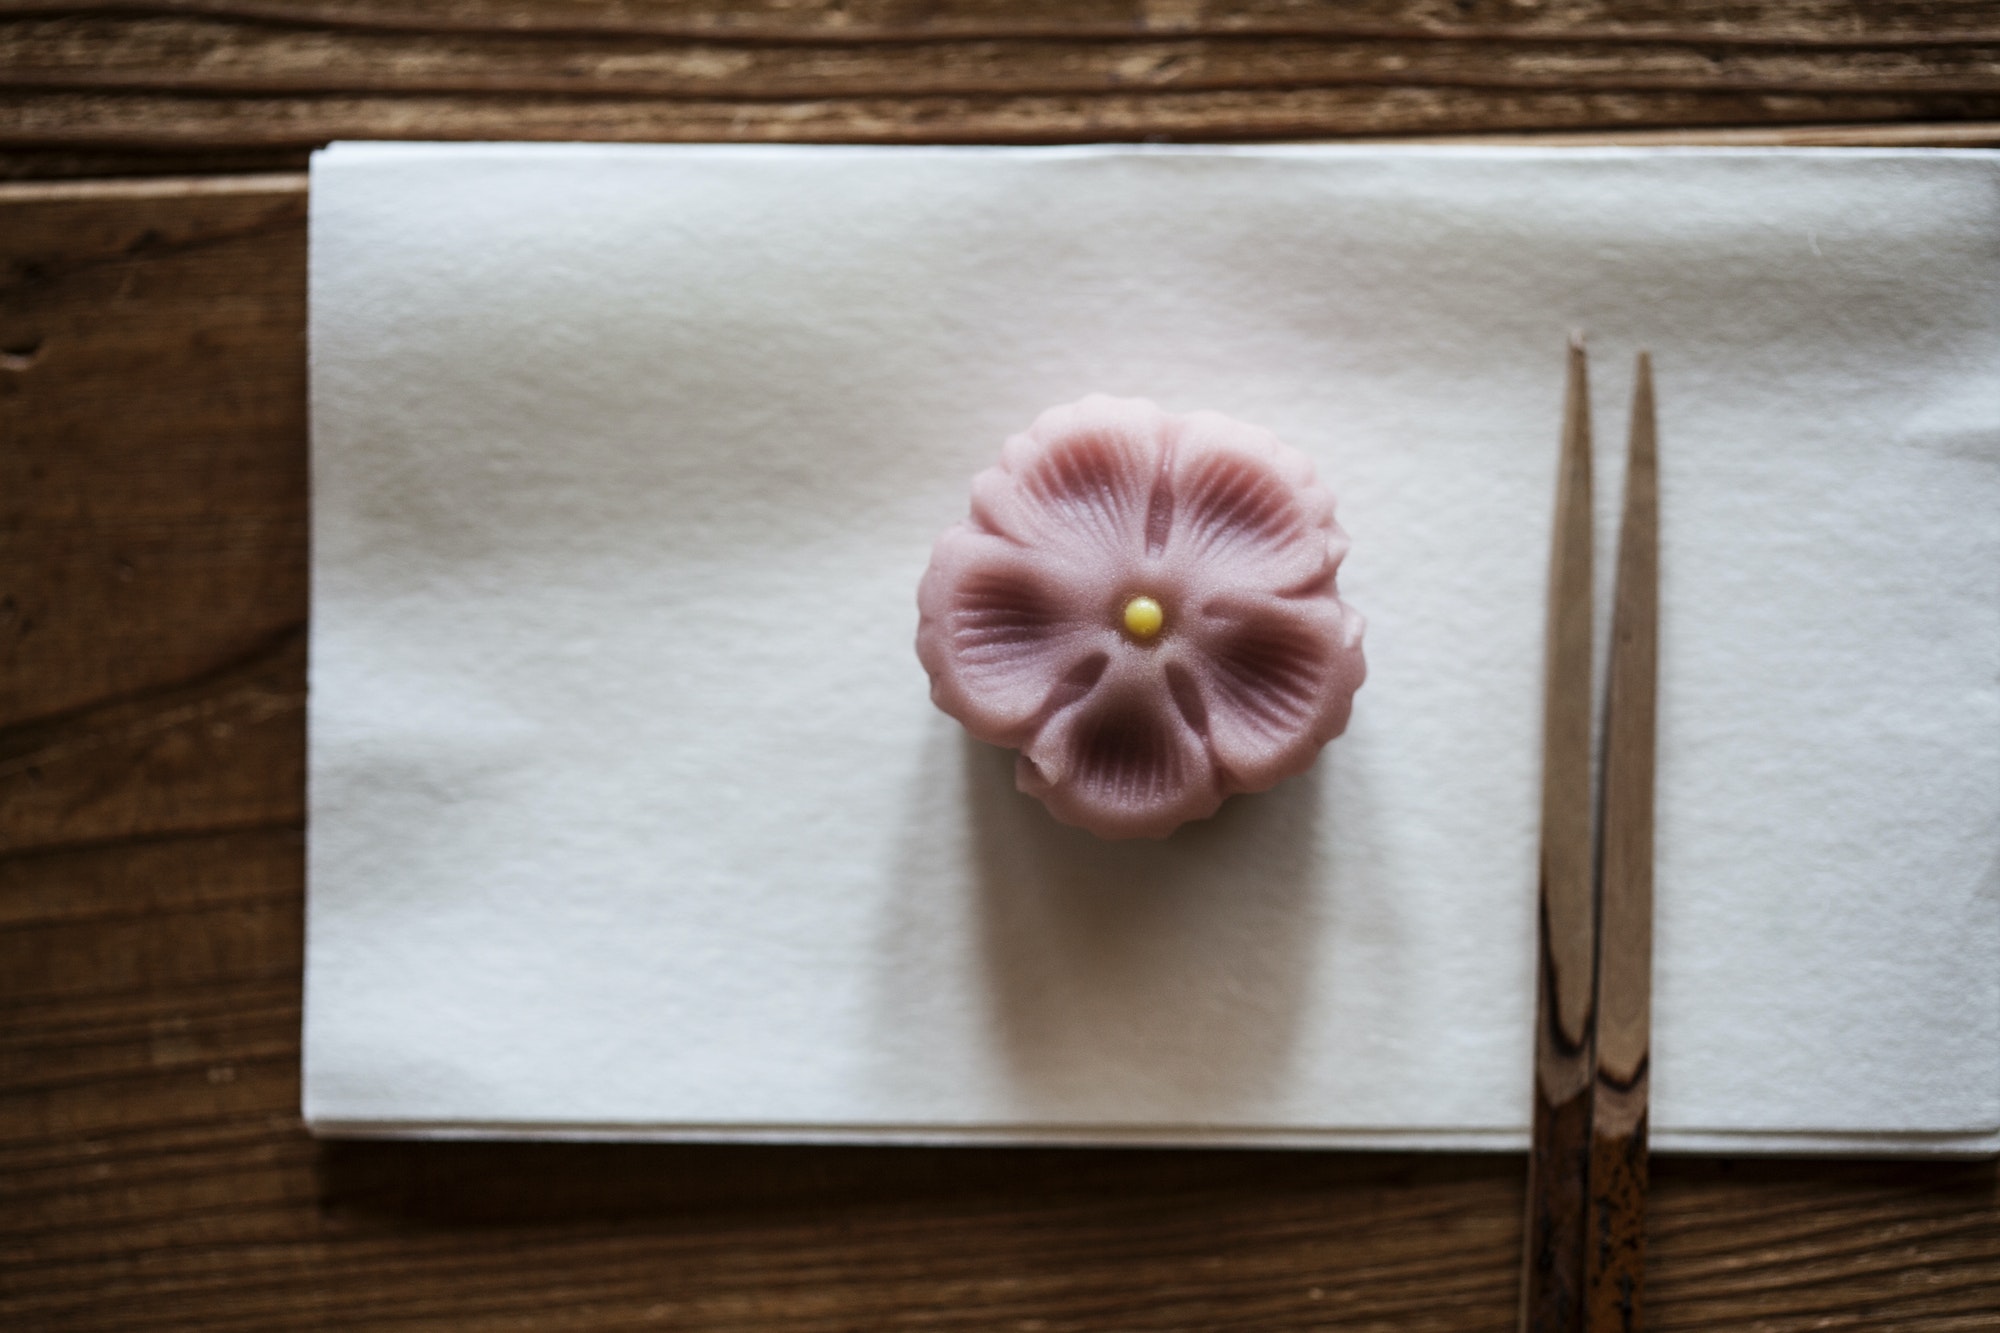 Pair of chopsticks and Wagashi, a sweet served during a Japanese Tea Ceremony.